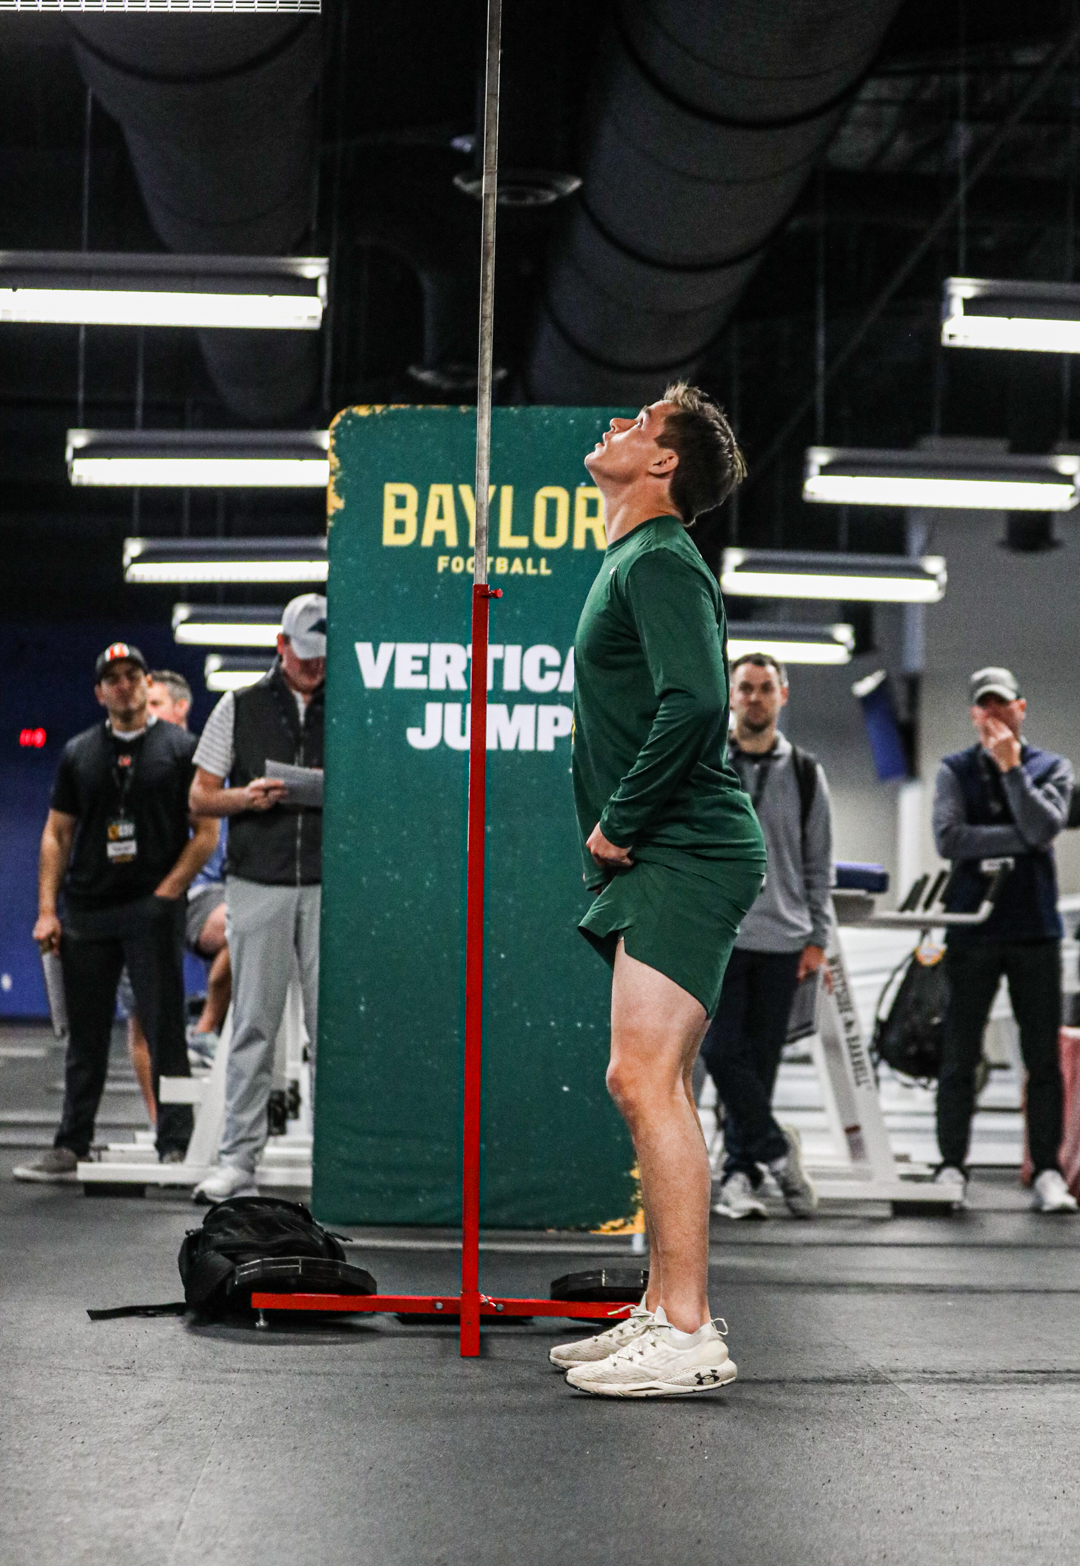 Baylor football's Pro Day presents 'blast from past' with former